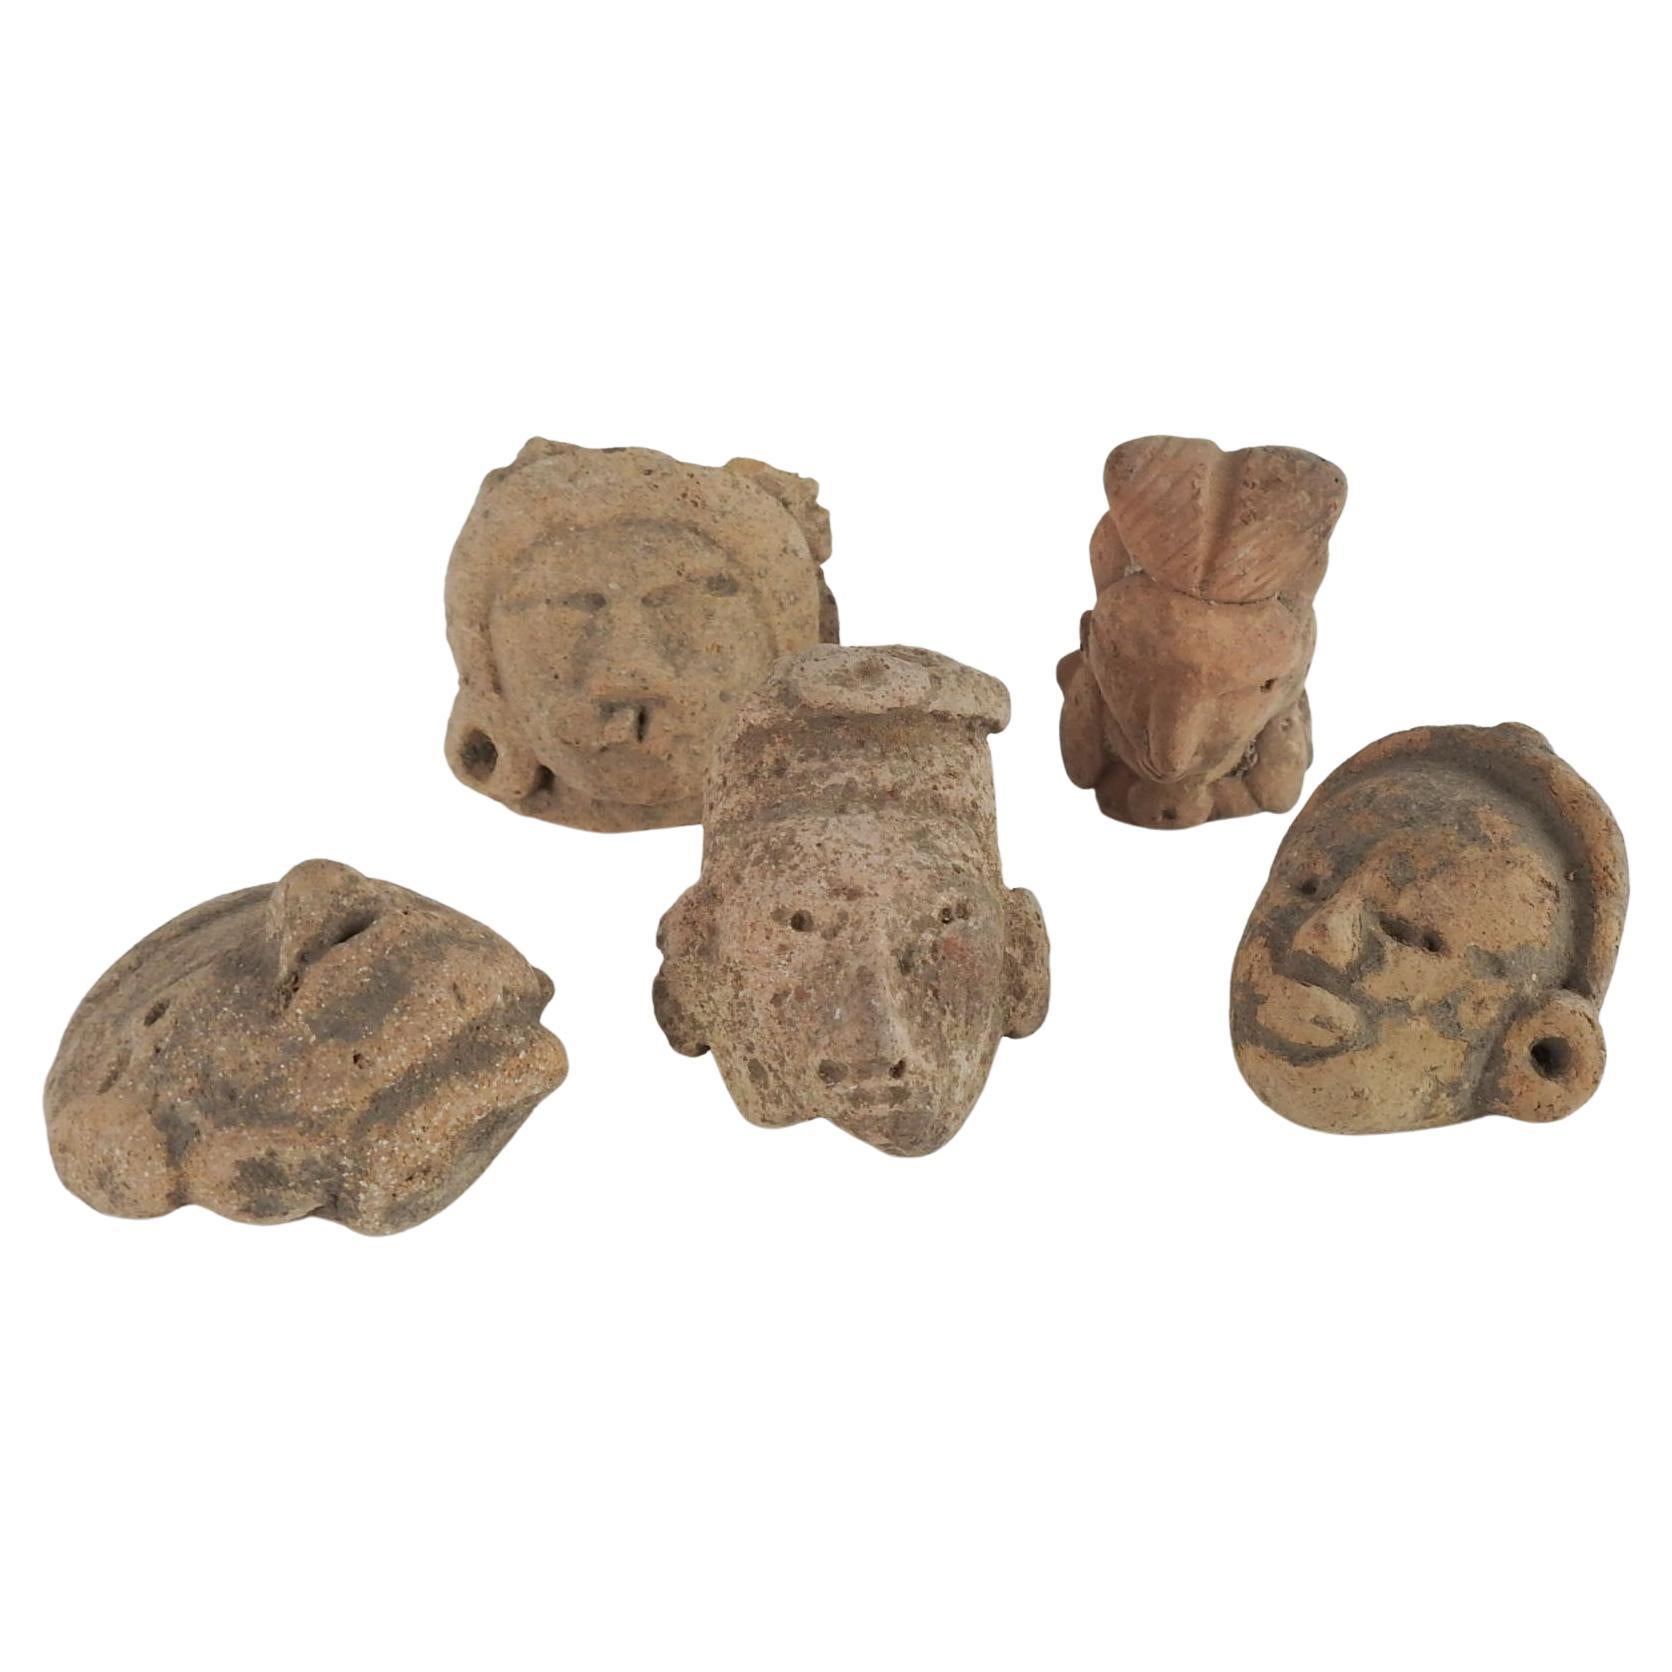 Pre Columbian Small Pottery Head Collection - Set of 5